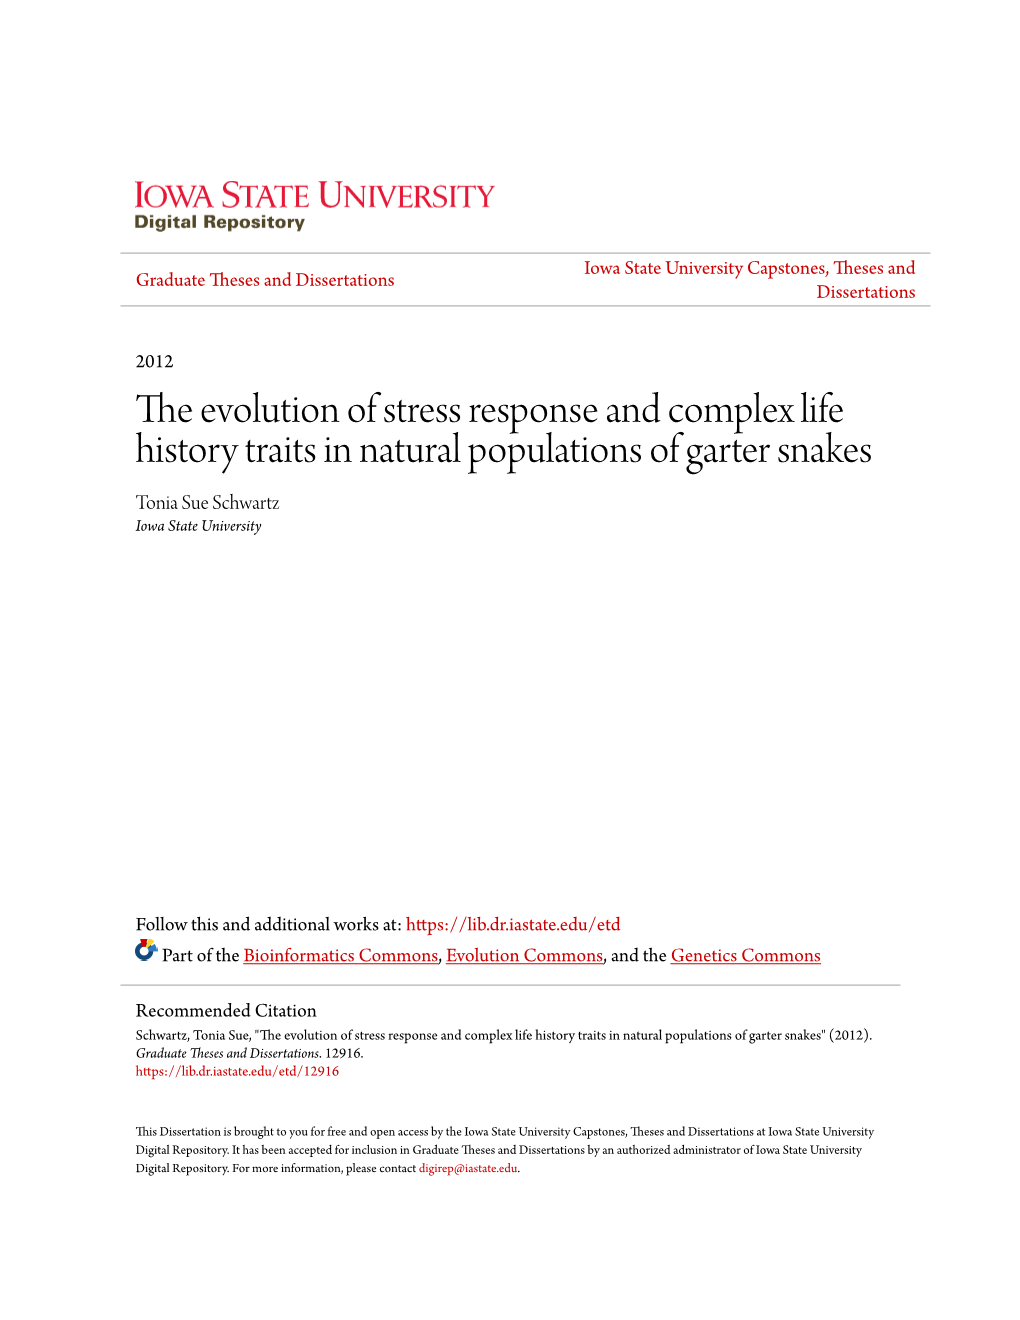 The Evolution of Stress Response and Complex Life History Traits in Natural Populations of Garter Snakes Tonia Sue Schwartz Iowa State University